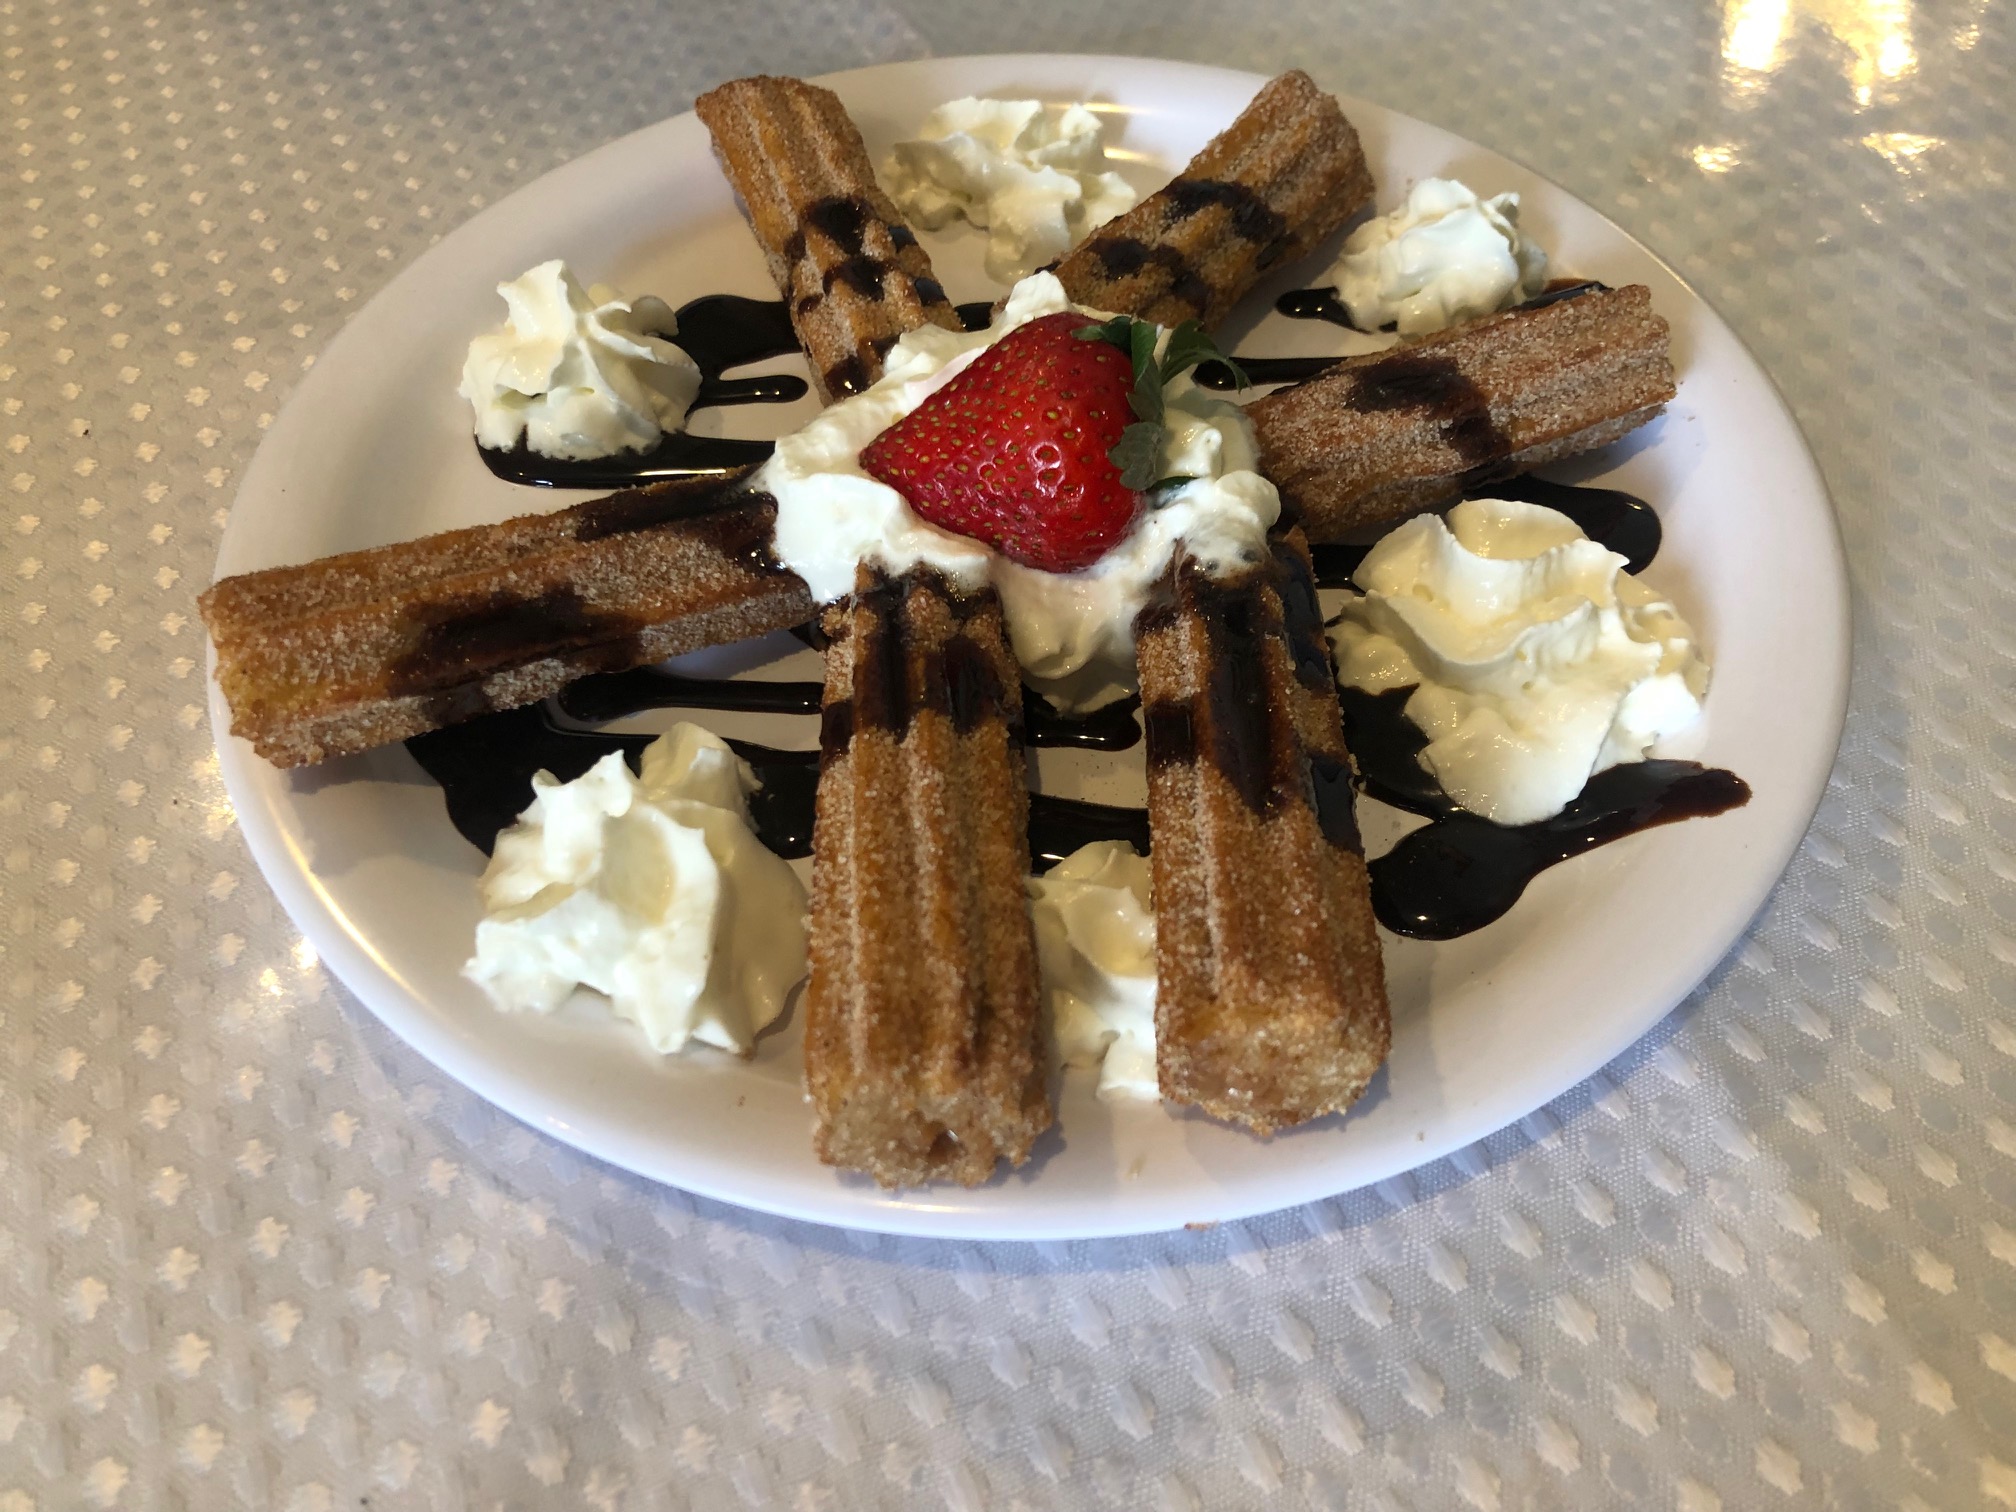 On a white plate, there are six churro sticks with chocolate syrup on top with whipped cream poufs. Photo by Alyssa Buckley.